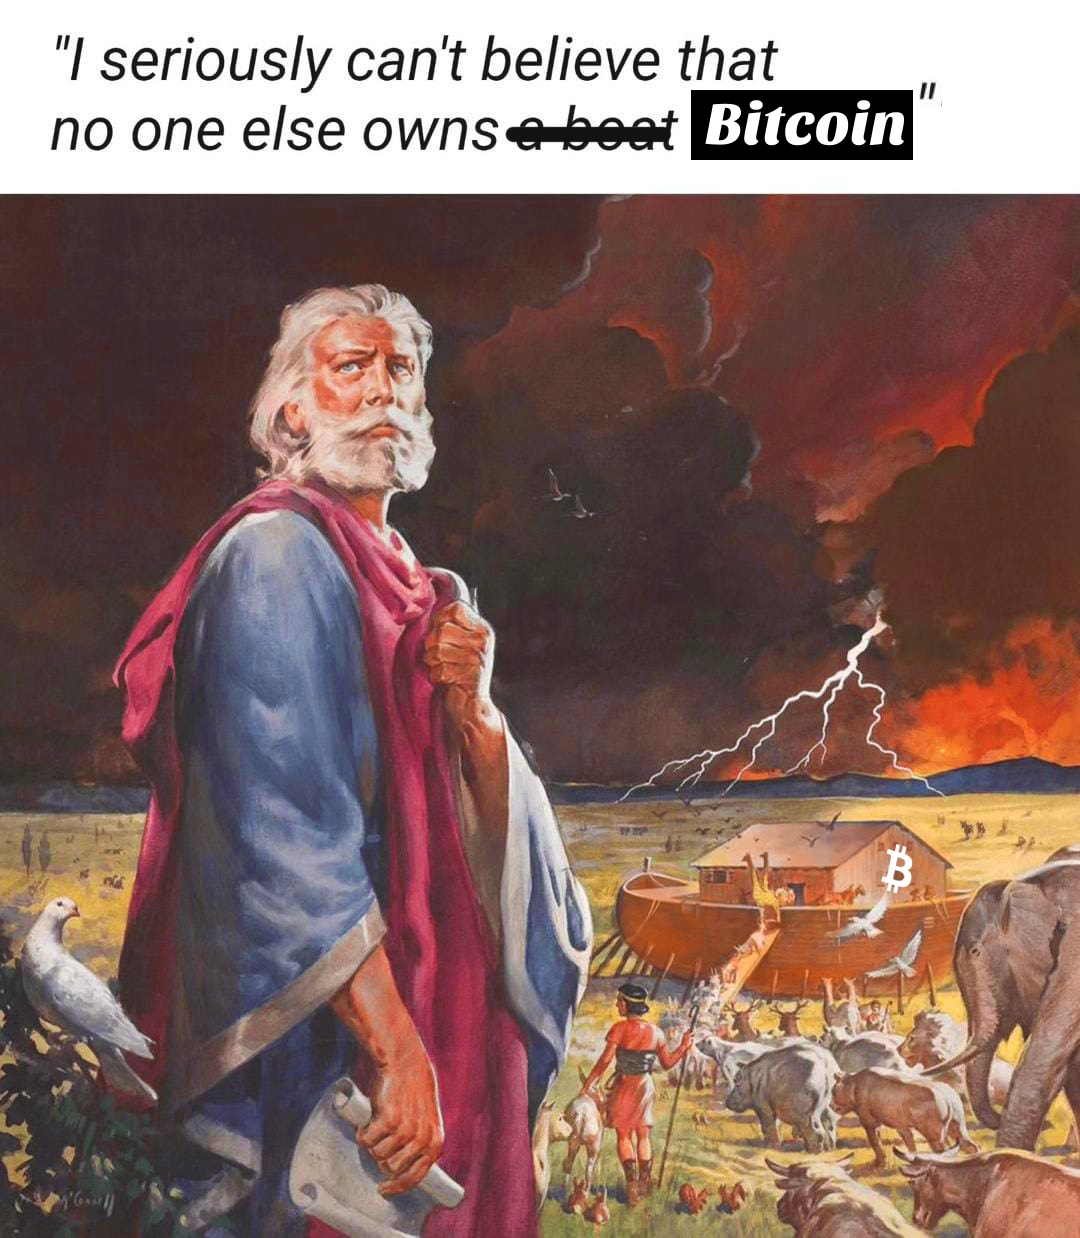 "I seriously can't believe that
no one else owns a beat Bitcoin
B
II